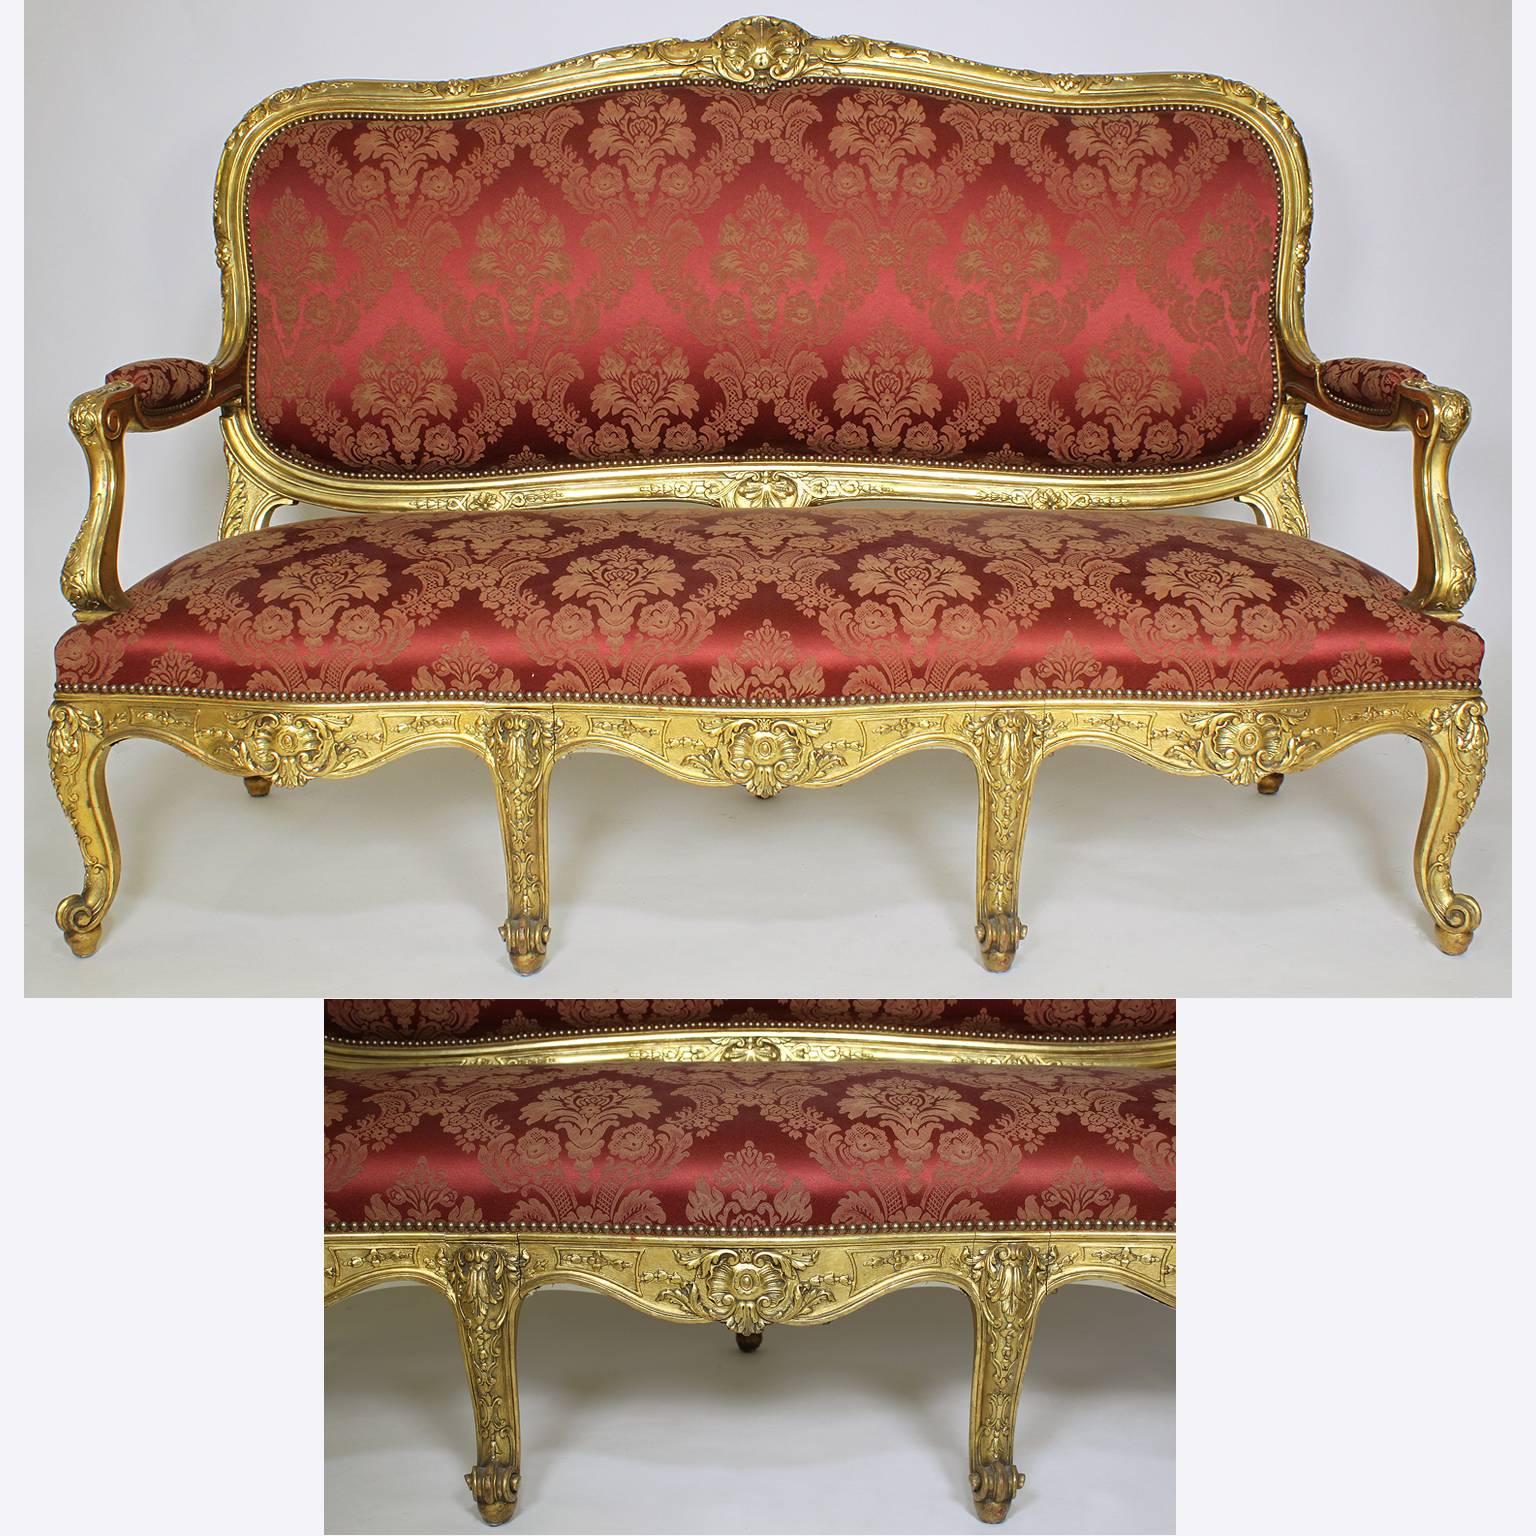 A fine French 19th century Louis XV style giltwood carved three piece salon suite, comprising of a canapé (Settee) and two fauteuils à la reine (Armchairs), all recently re-upholstered and with original gilt, Paris, circa 1890.

Measures: Settee